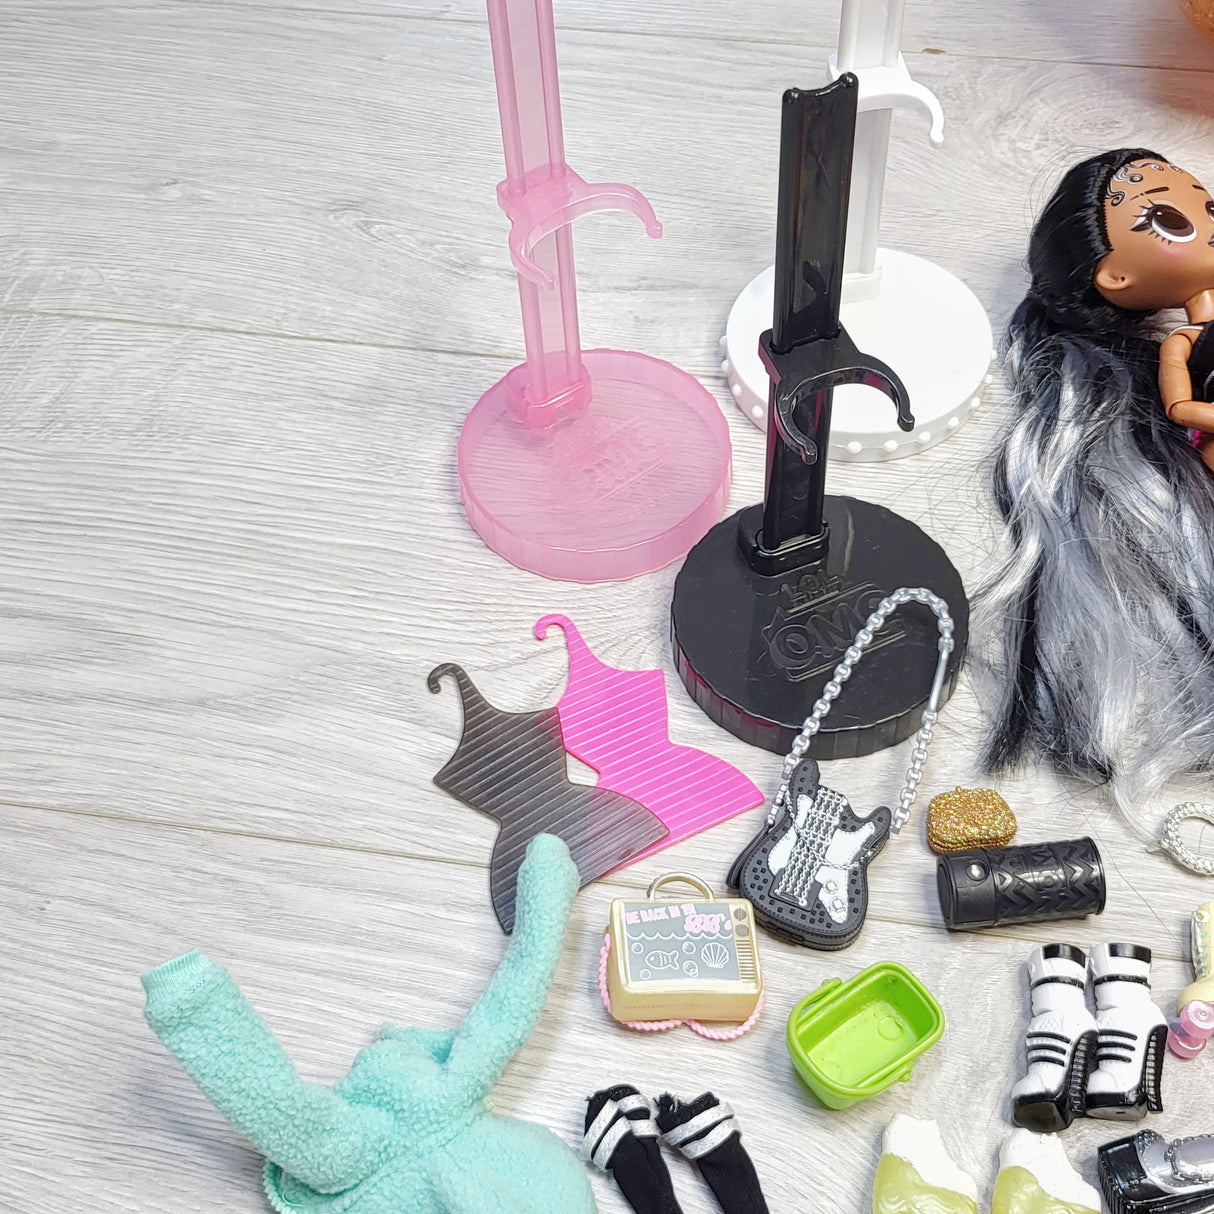 CHAM2 - LOL + OMG Surprise doll and accessory lot